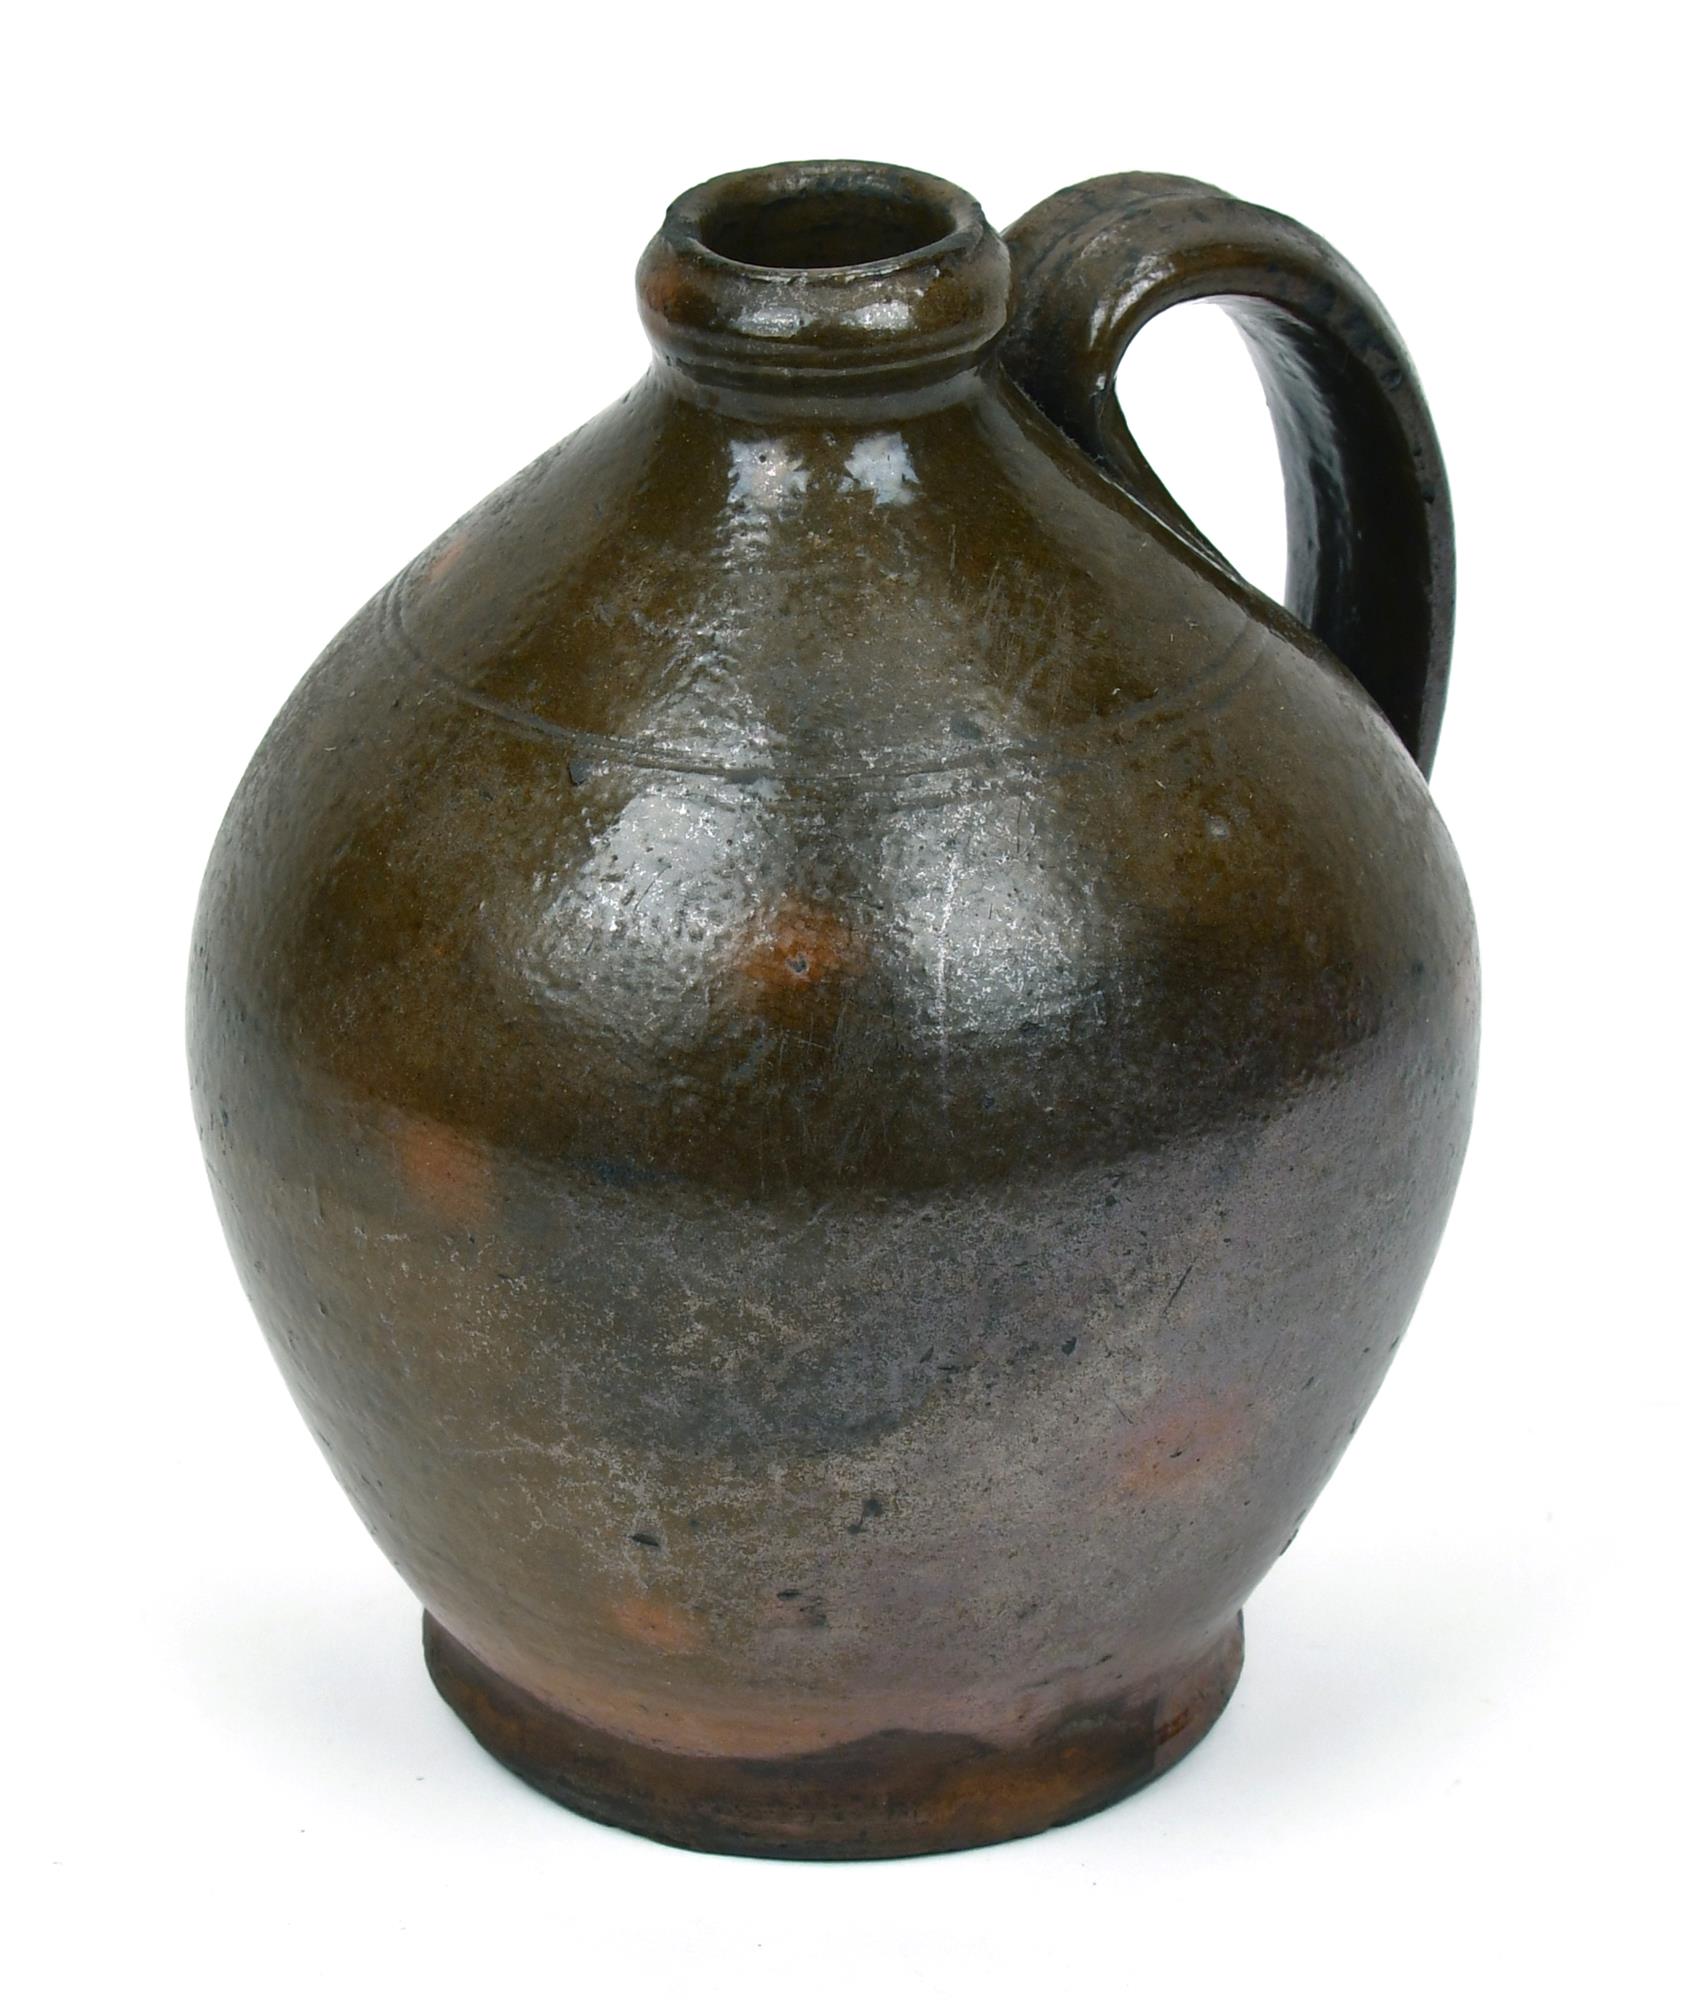 EARLY 19TH C GONIC REDWARE JUG  3aca70